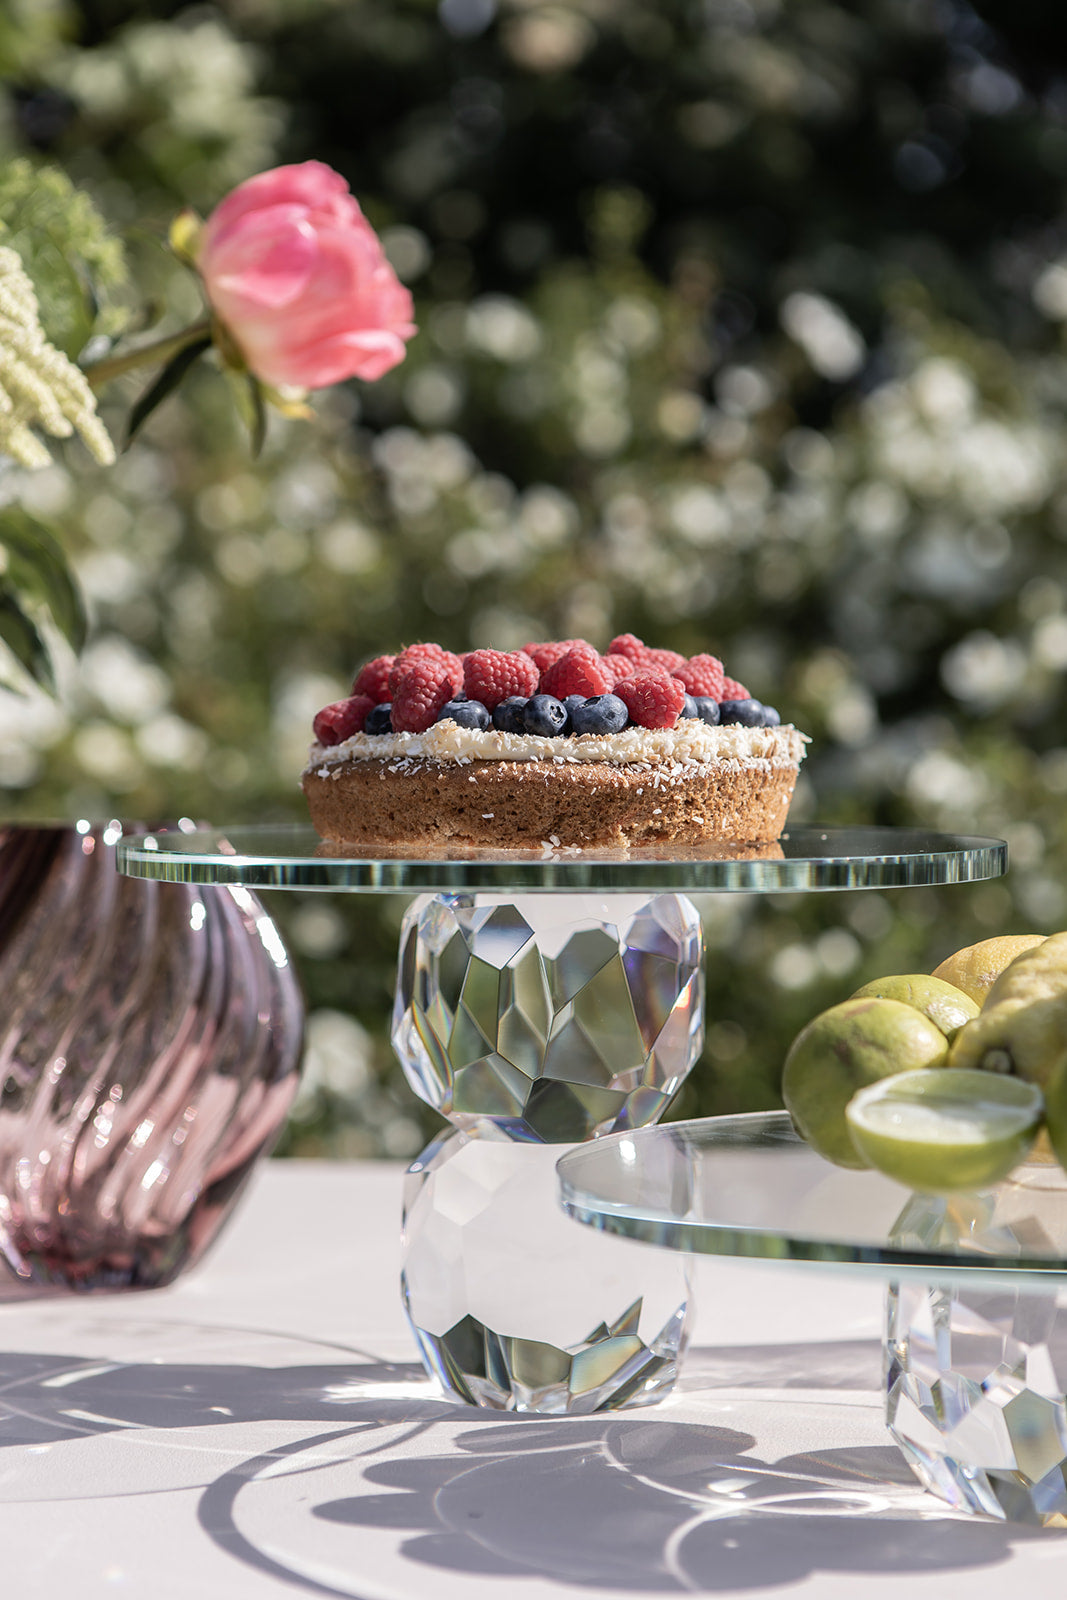 Double Storm Crystal Cake Stand, 30cm